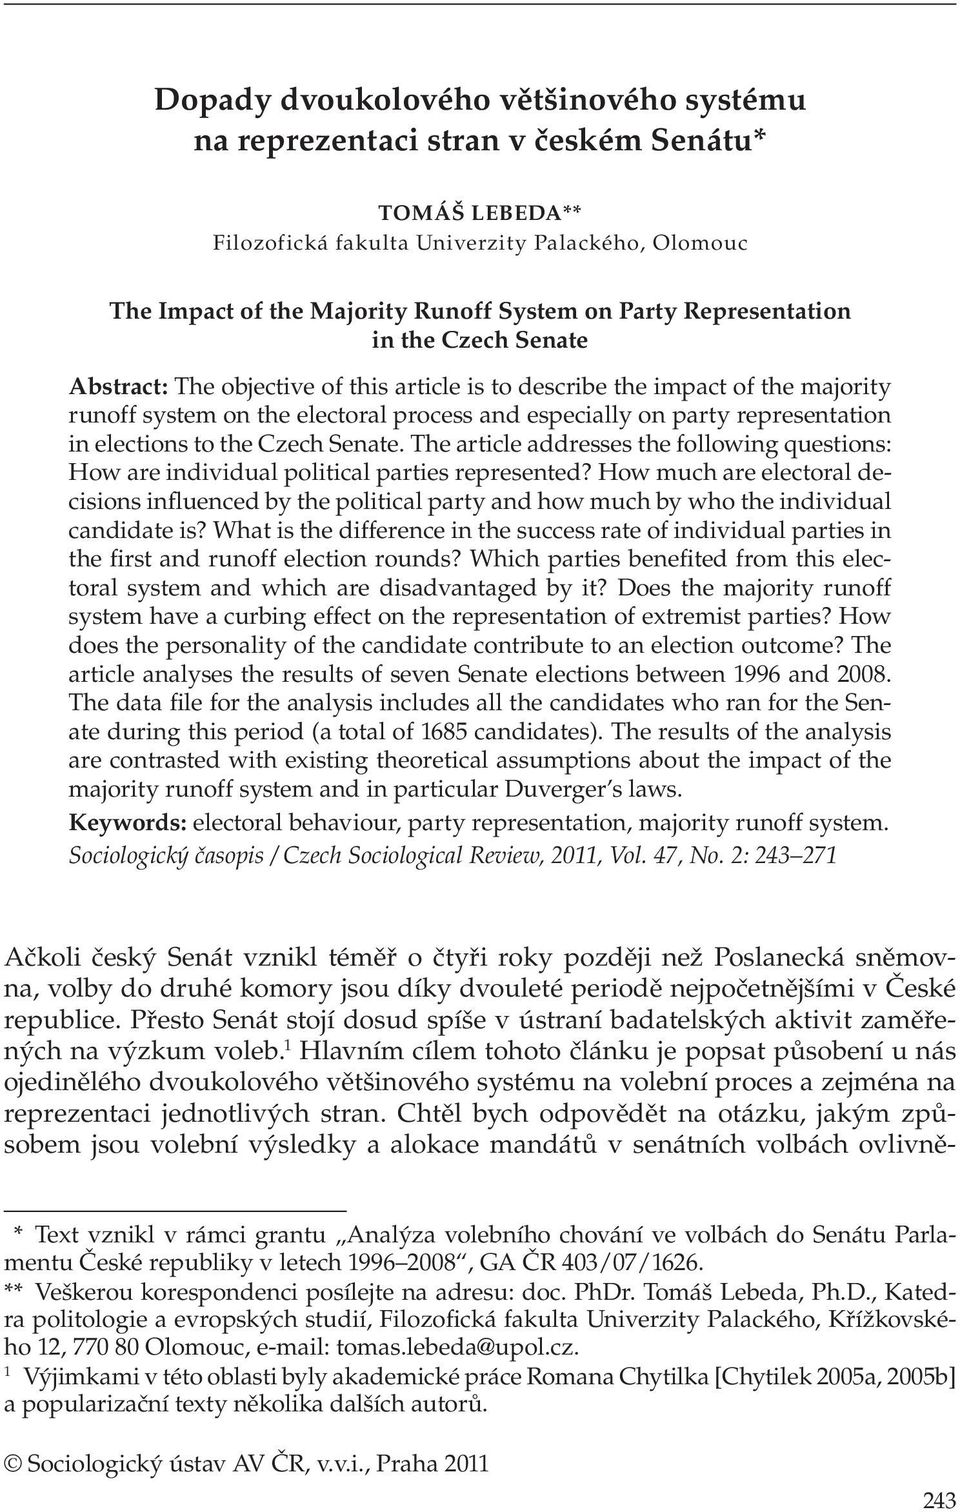 elections to the Czech Senate. The article addresses the following questions: How are individual political parties represented?